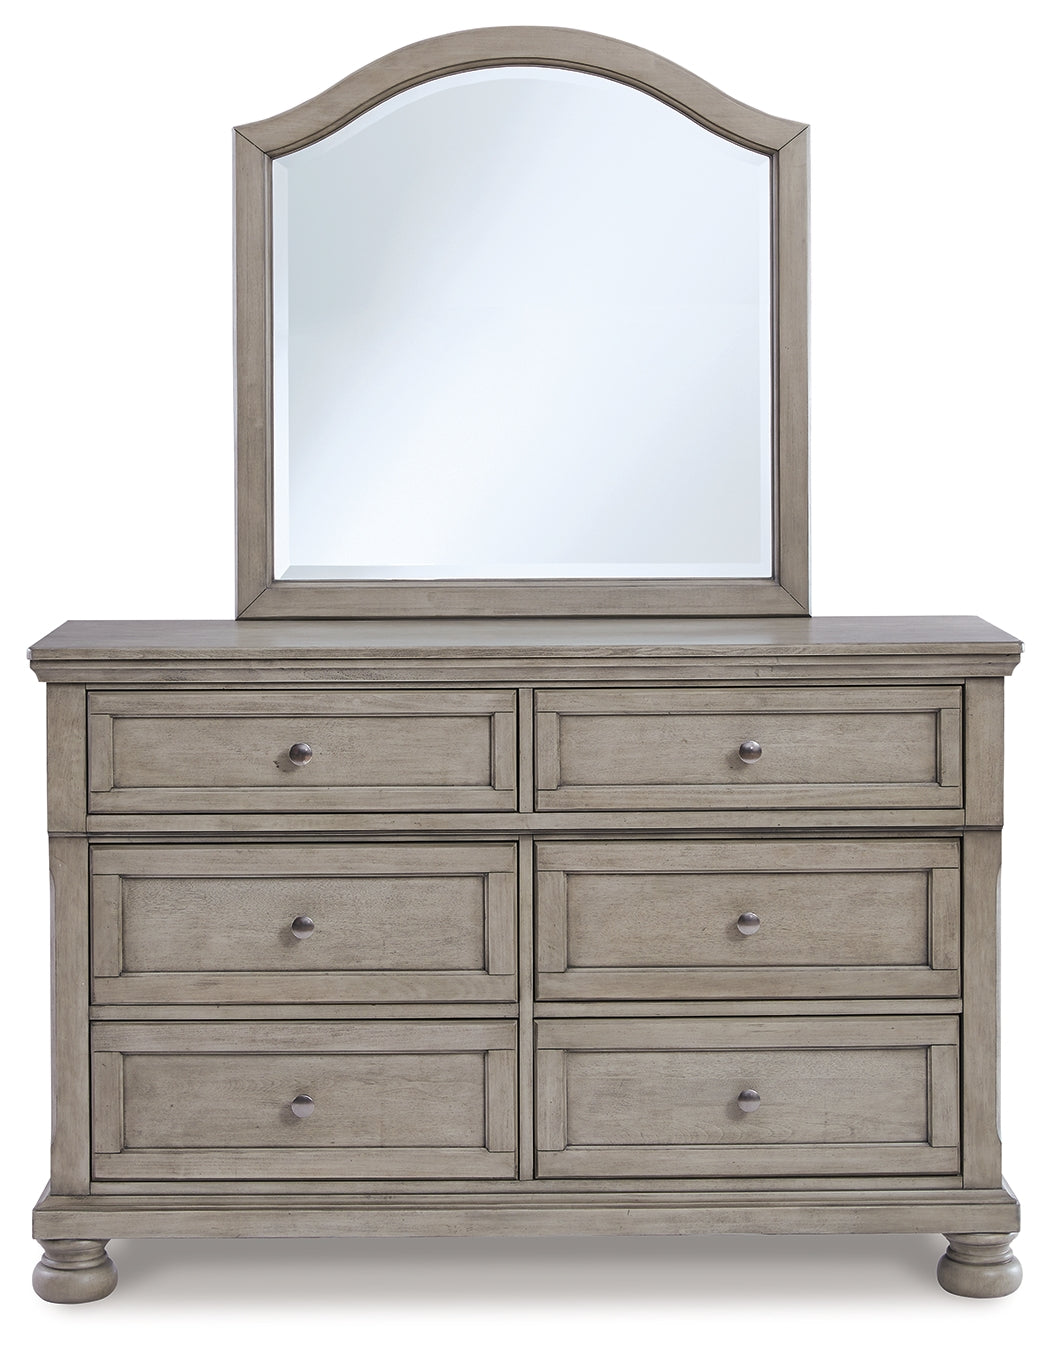 Lettner Light Gray Twin Sleigh Storage Bedroom Set with Dresser and Mirror